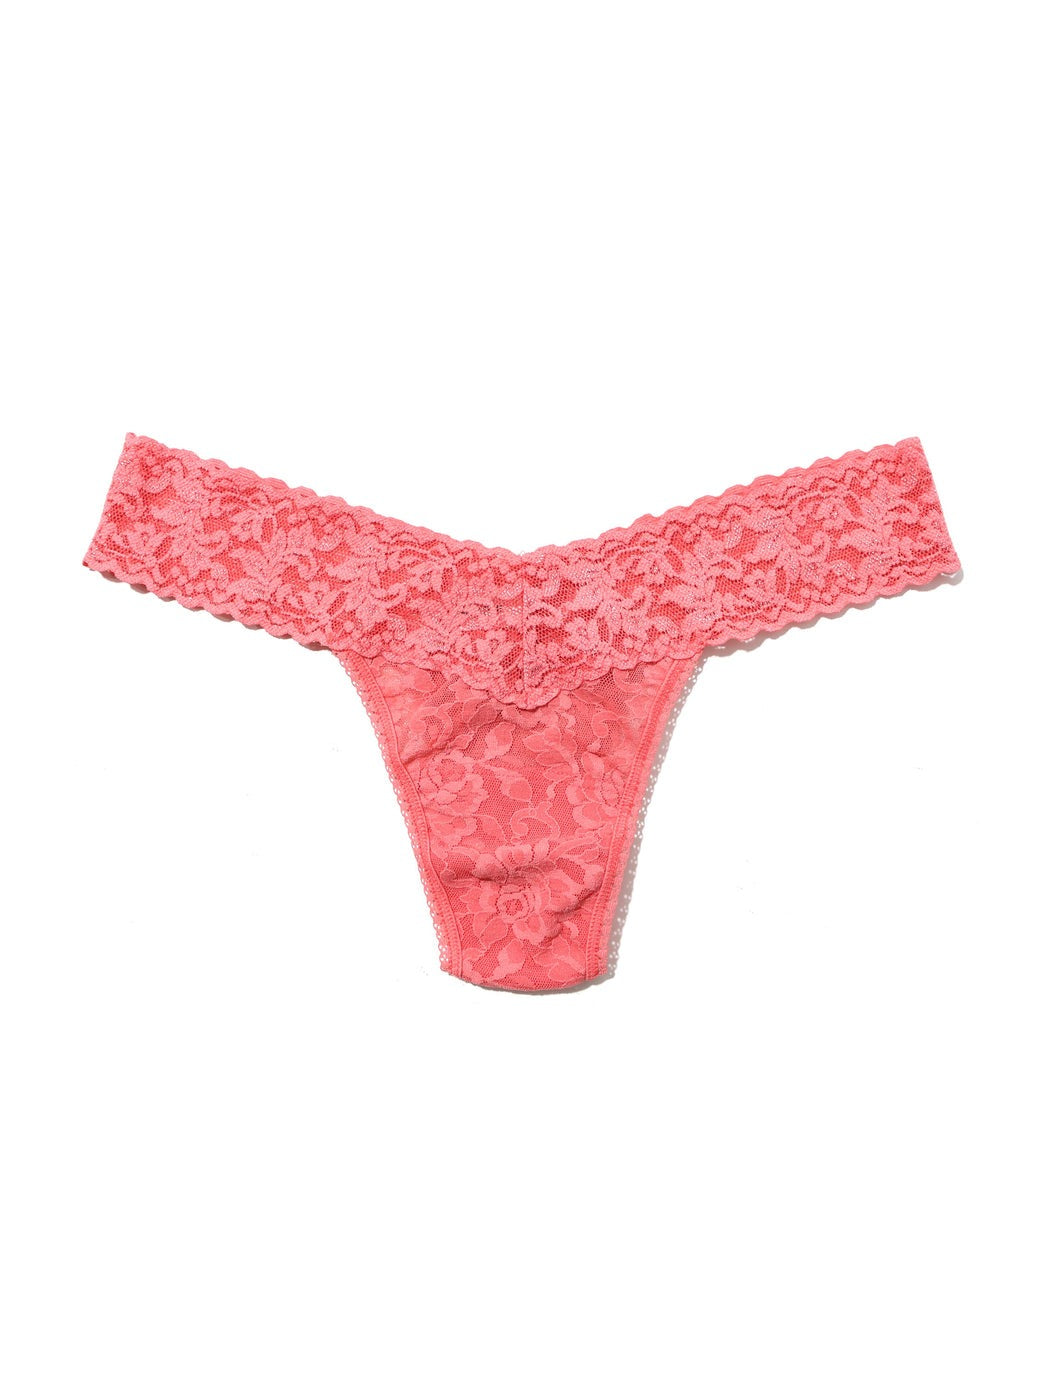 Emery Thong in Solid Dusty Rose